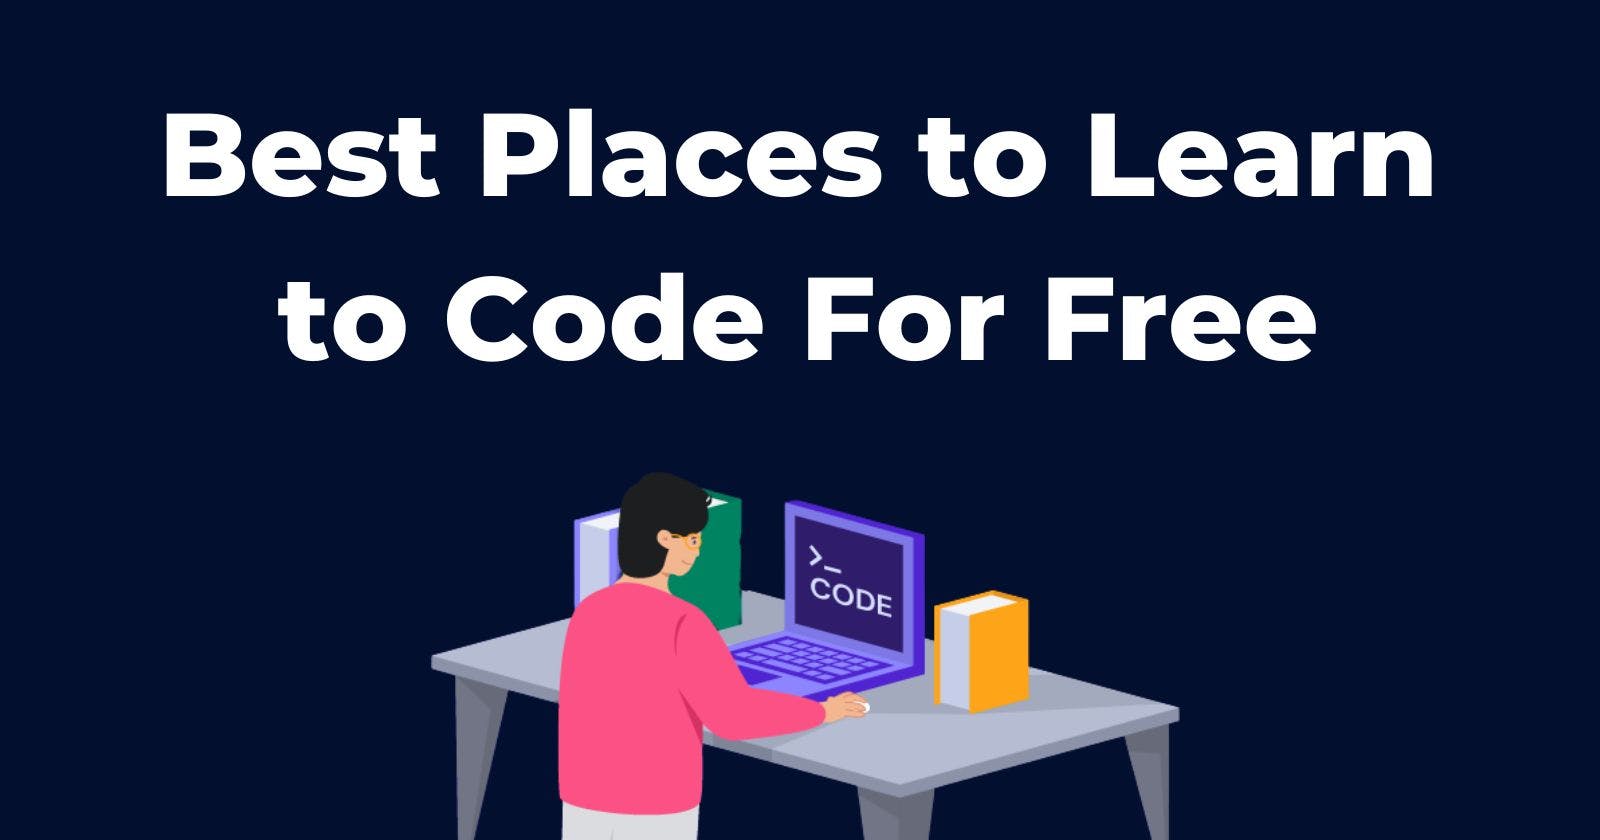 Best Places to Learn to Code For Free